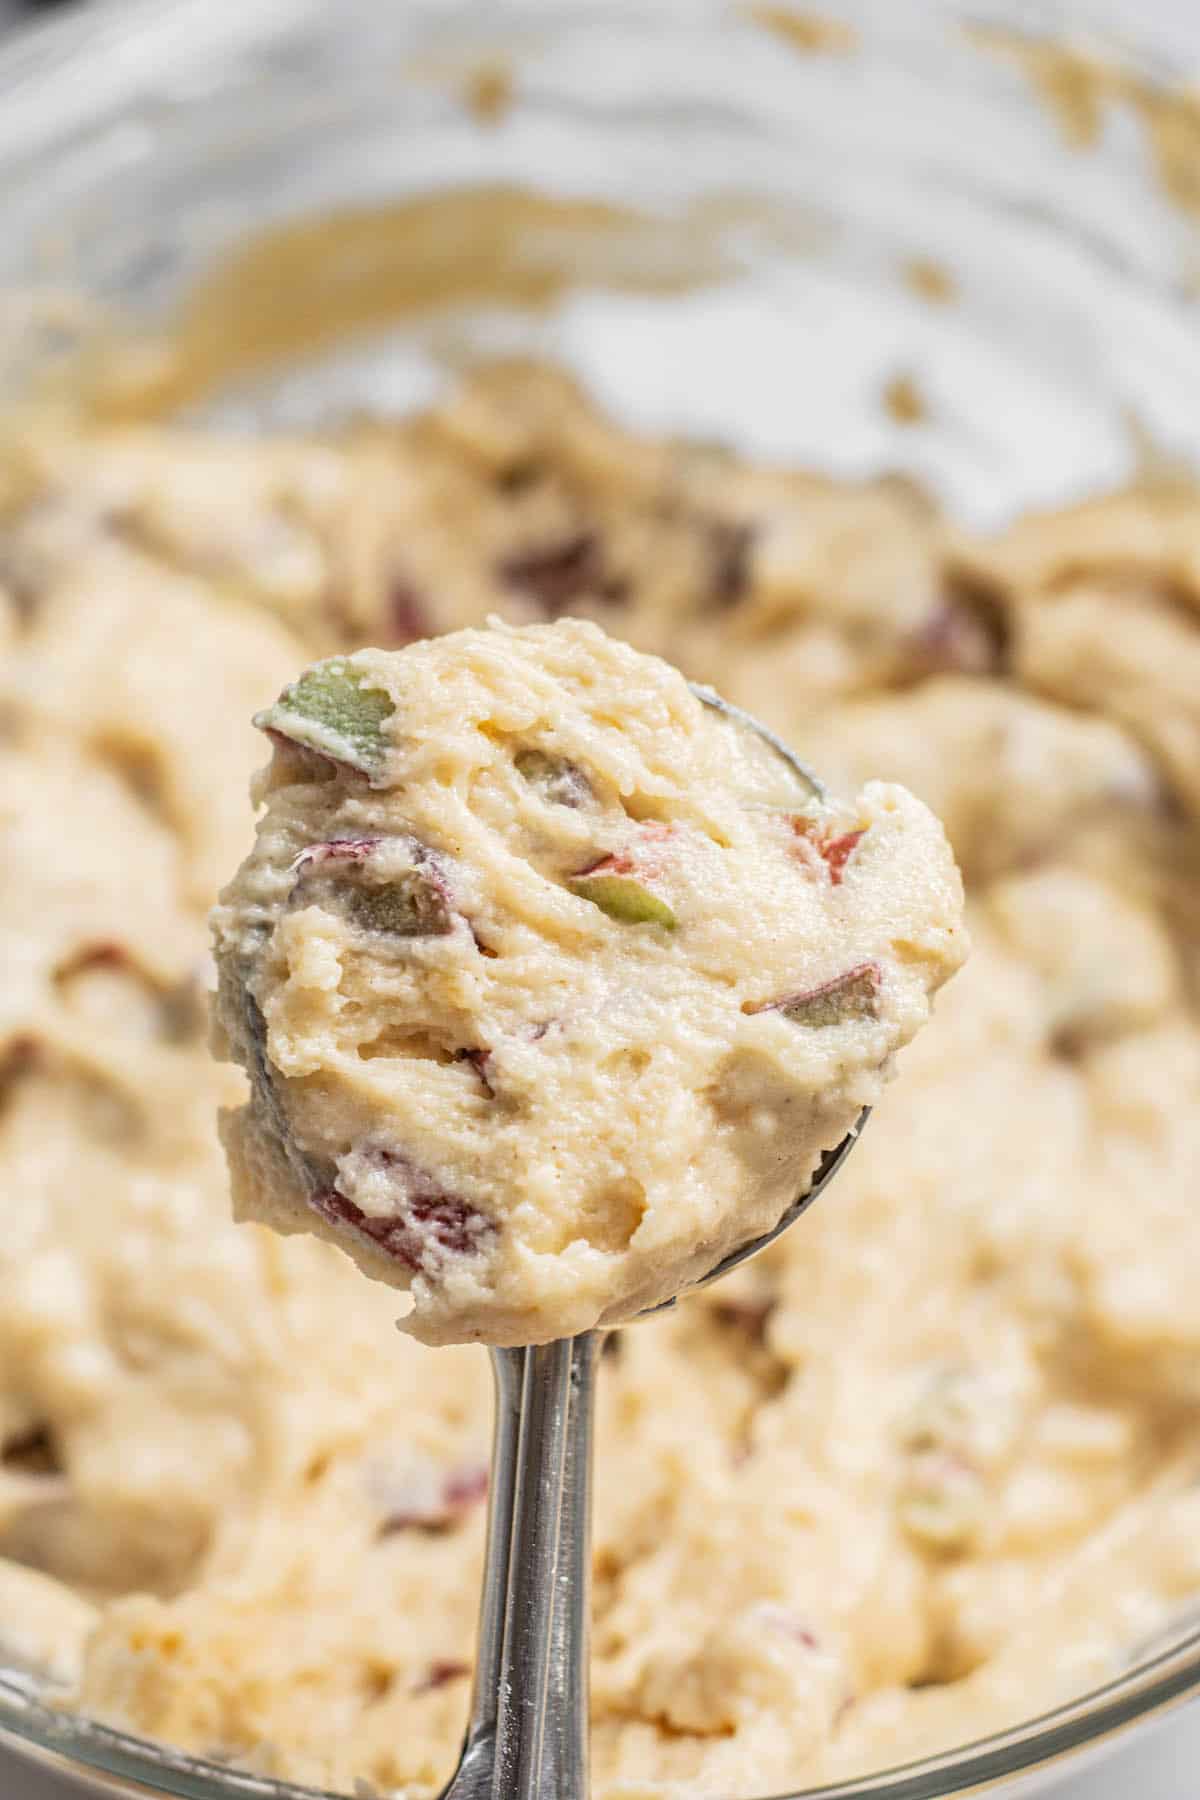 a scoop of muffin batter with rhubarb pieces.